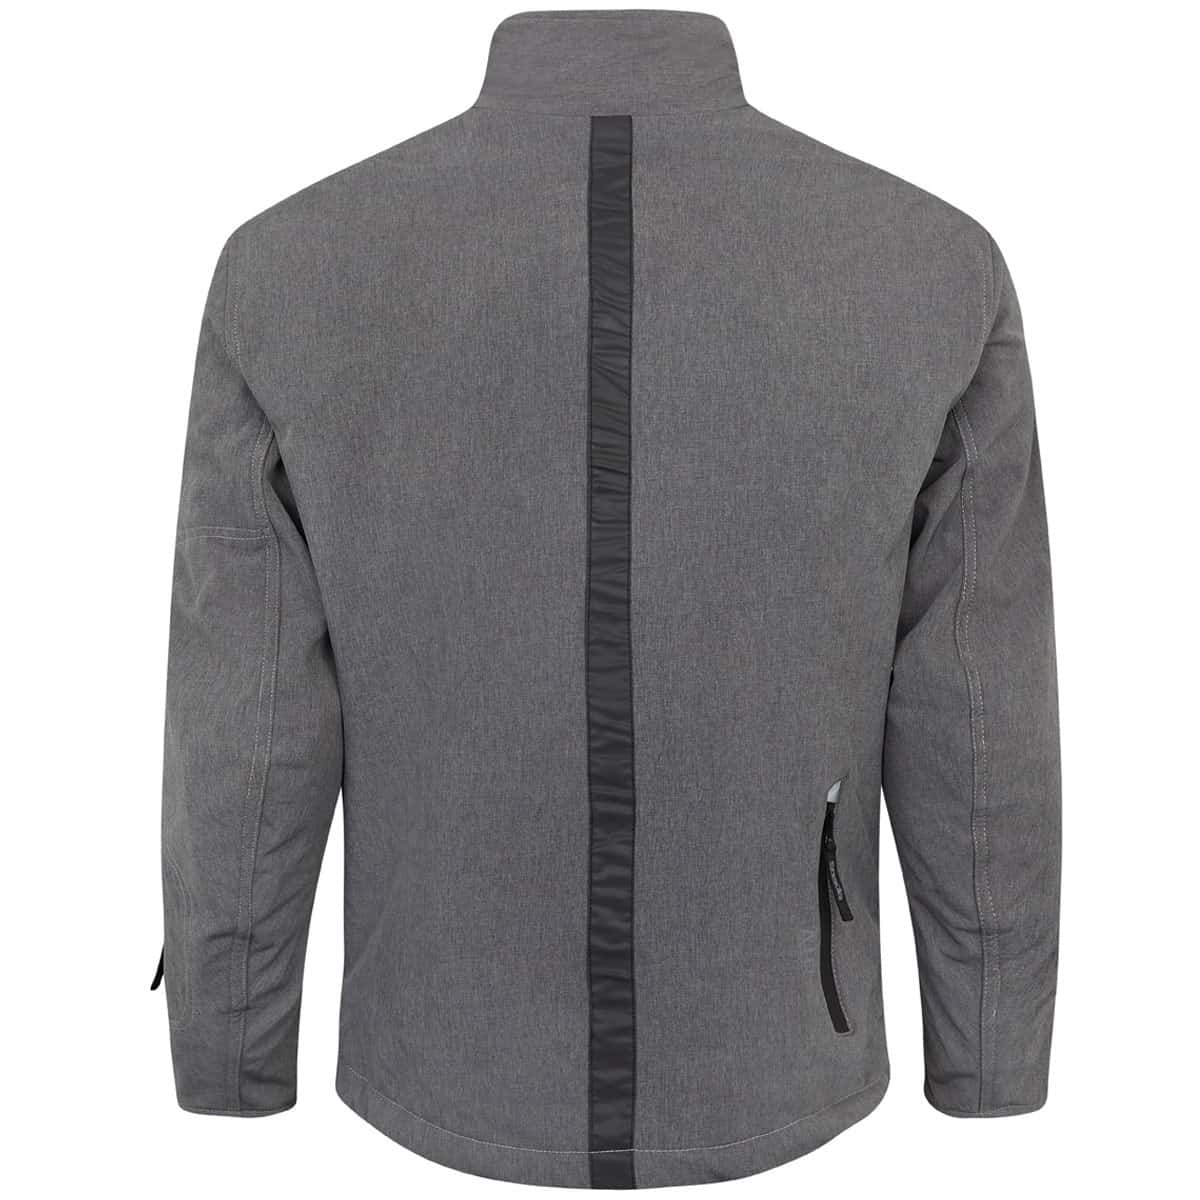 Spada Commute WP CE Jacket: A waterproof softshell jacket with CE protection - Back